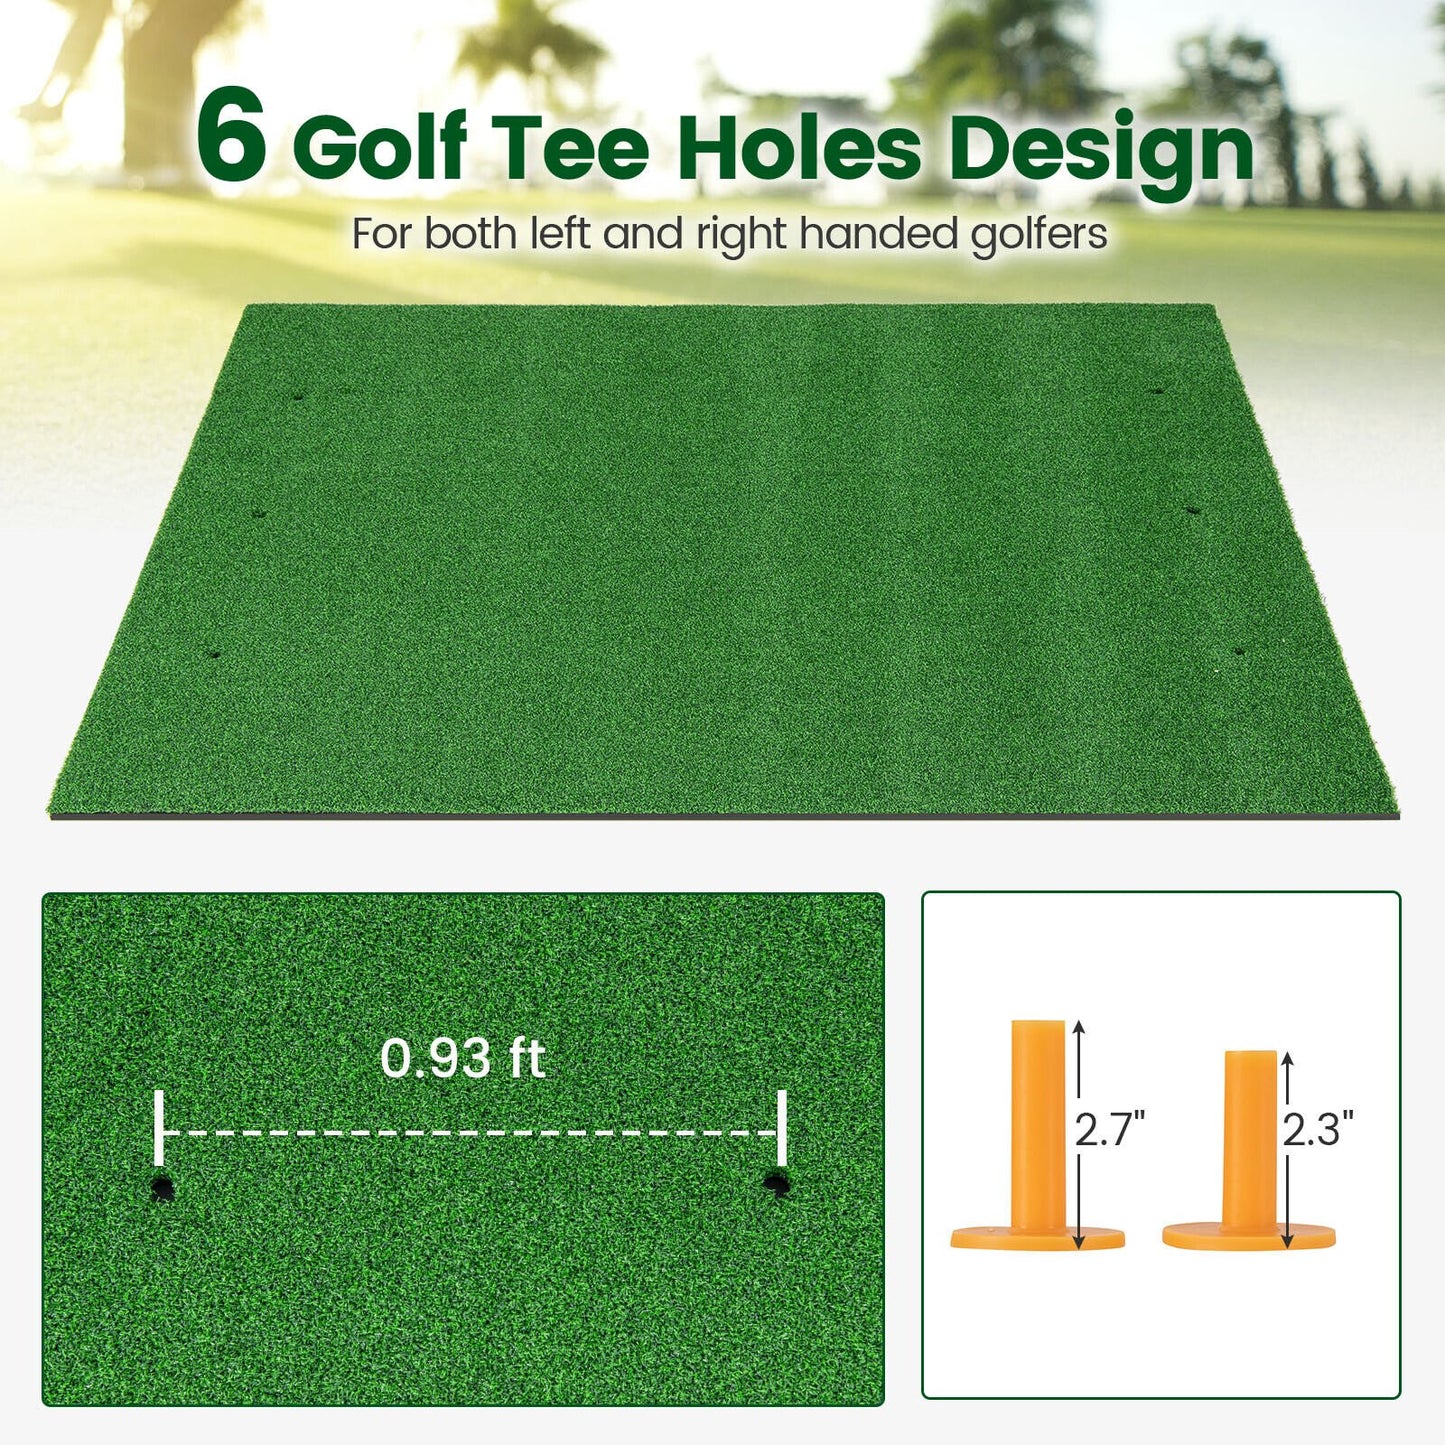 Artificial Turf Mat for Indoor and Outdoor Golf Practice Includes 2 Rubber Tees and 2 Alignment Sticks-32mm, Green at Gallery Canada